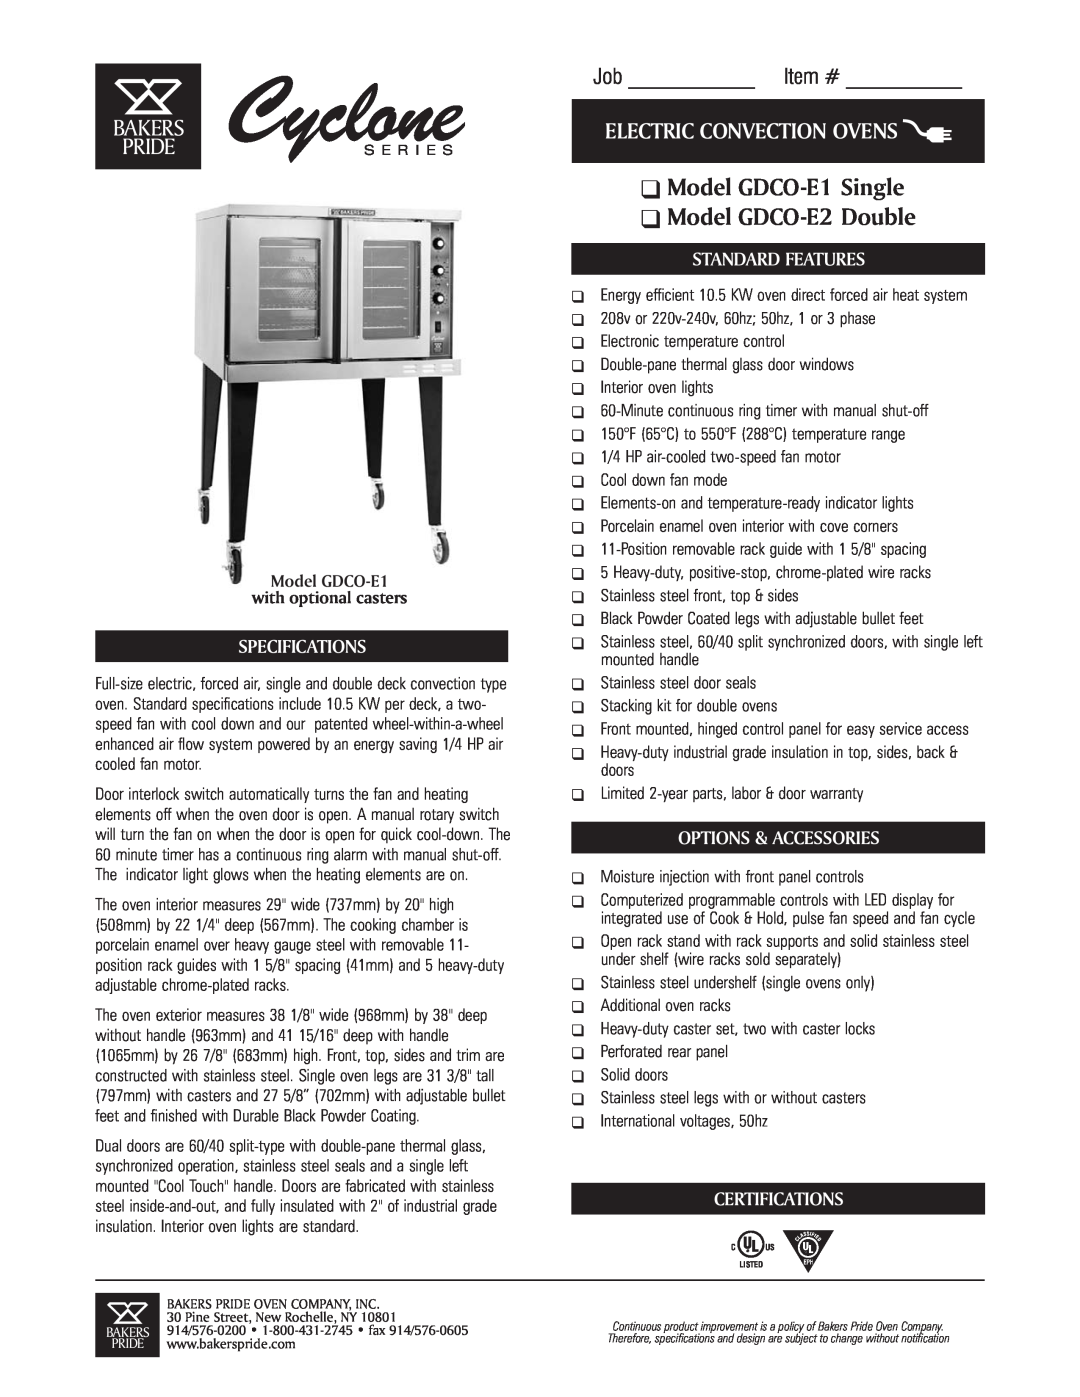 Bakers Pride Oven GDCO-E1 Single specifications Model GDCO-E1 with optional casters, Electric Convection Ovens, Job Item # 